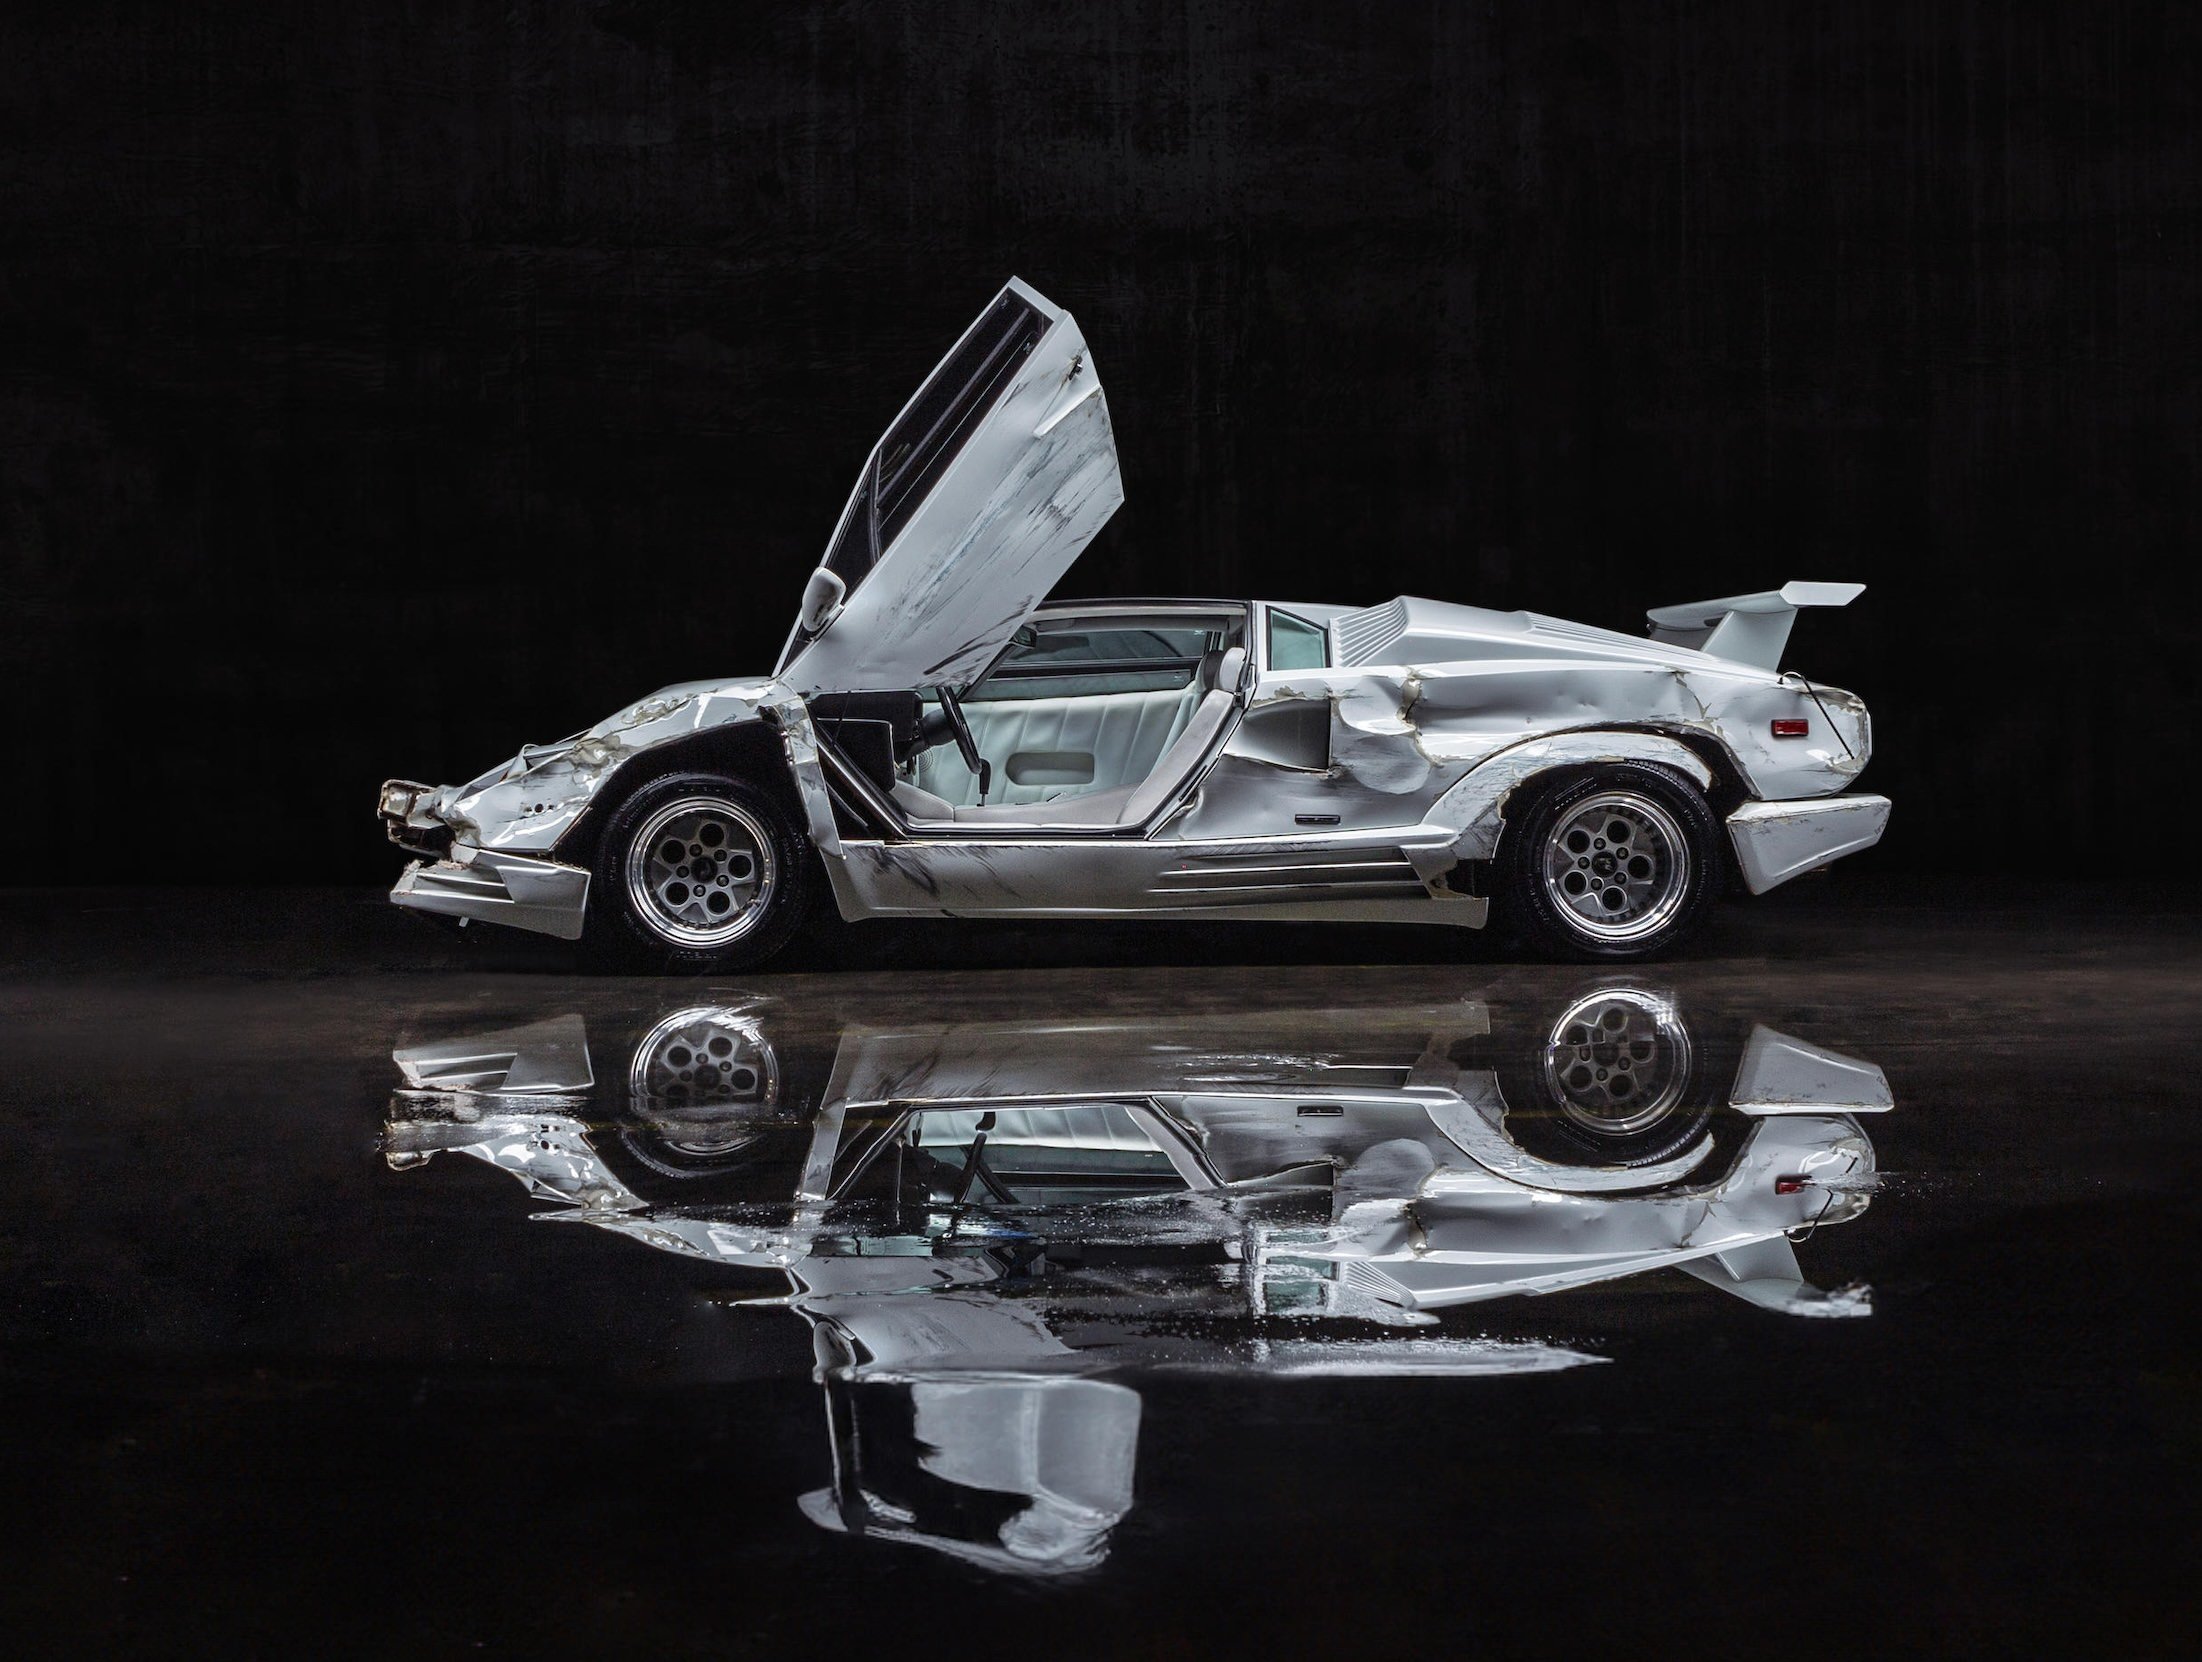 For Sale: The Wrecked Lamborghini Countach From The Wolf of Wall